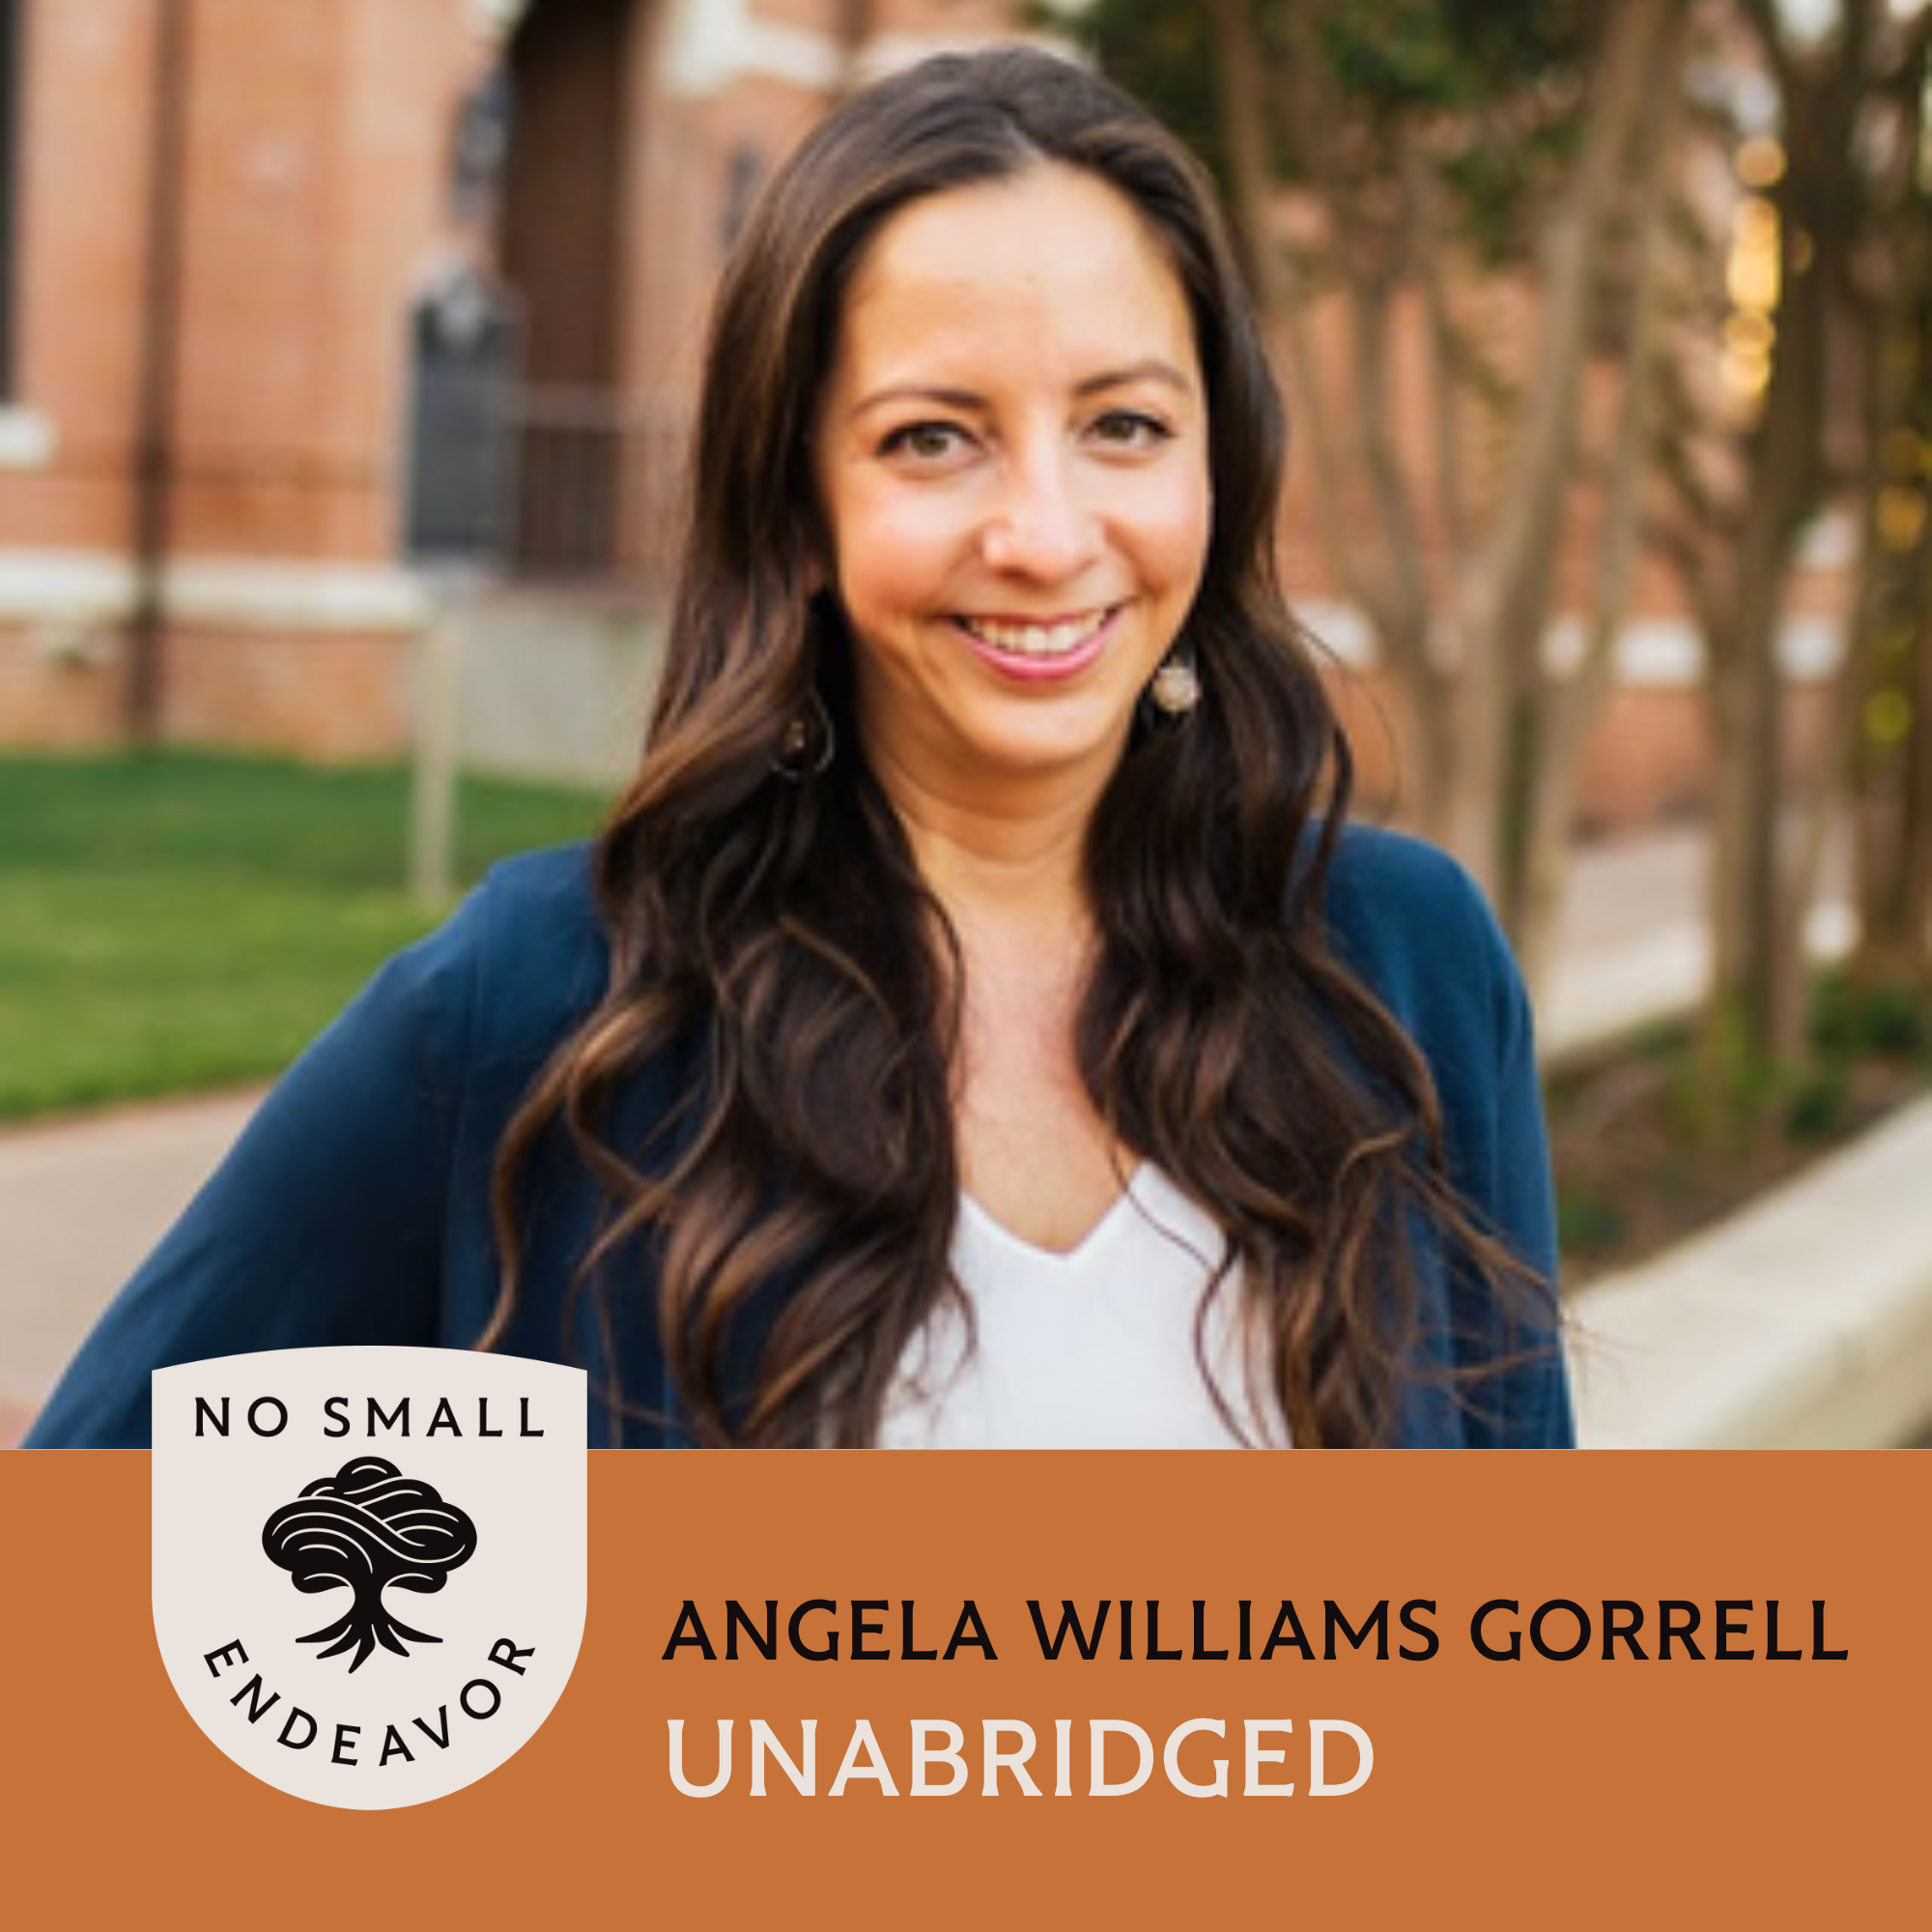 Thumbnail for "155: Unabridged Interview: Angela Williams Gorrell".